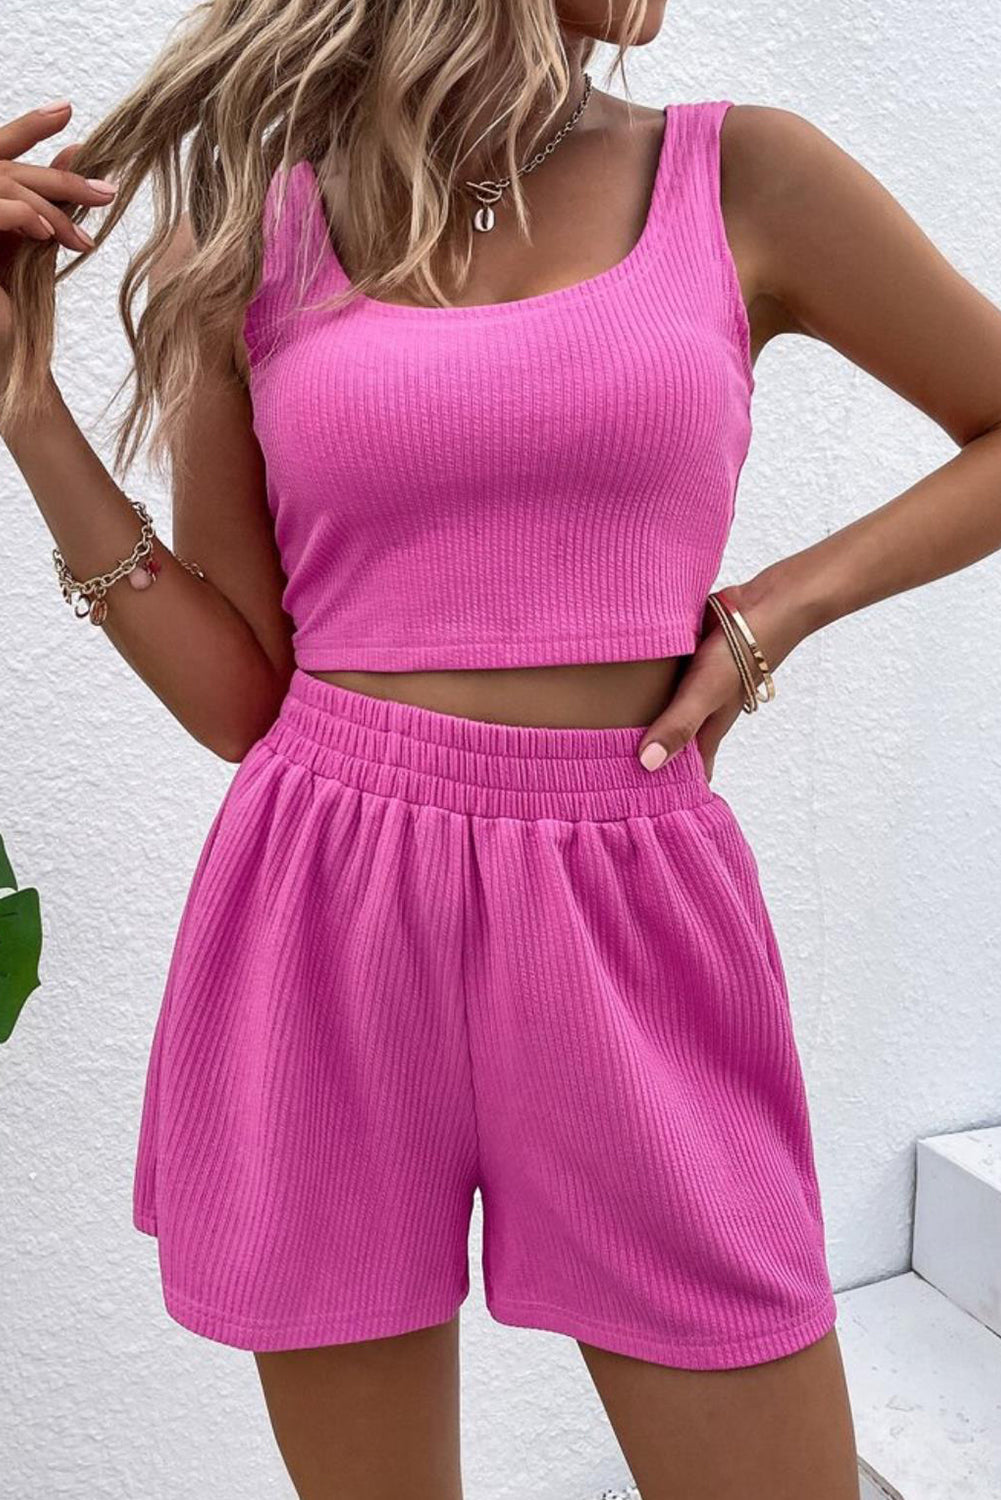 Rose Plain Sleeveless High Waisted Corduroy Two Piece Shorts Set - Cowtown Bling N Things